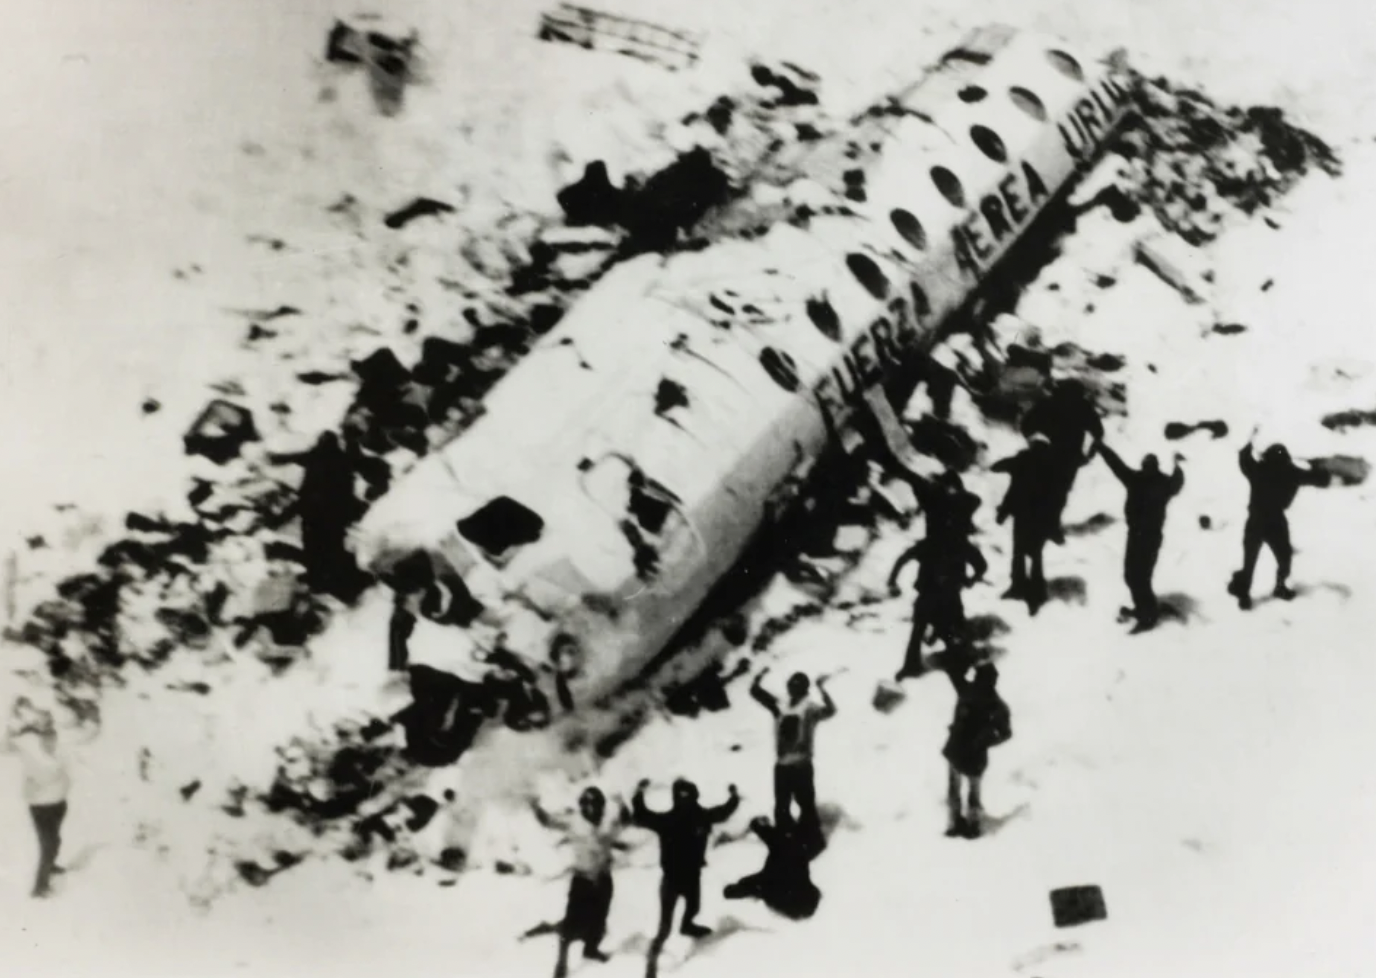 Survivors from the "Andes Flight Disaster" wait to be rescued. Of the initial 45 passengers and crew, only 16 survived. Chile/Argentina border, 1972.